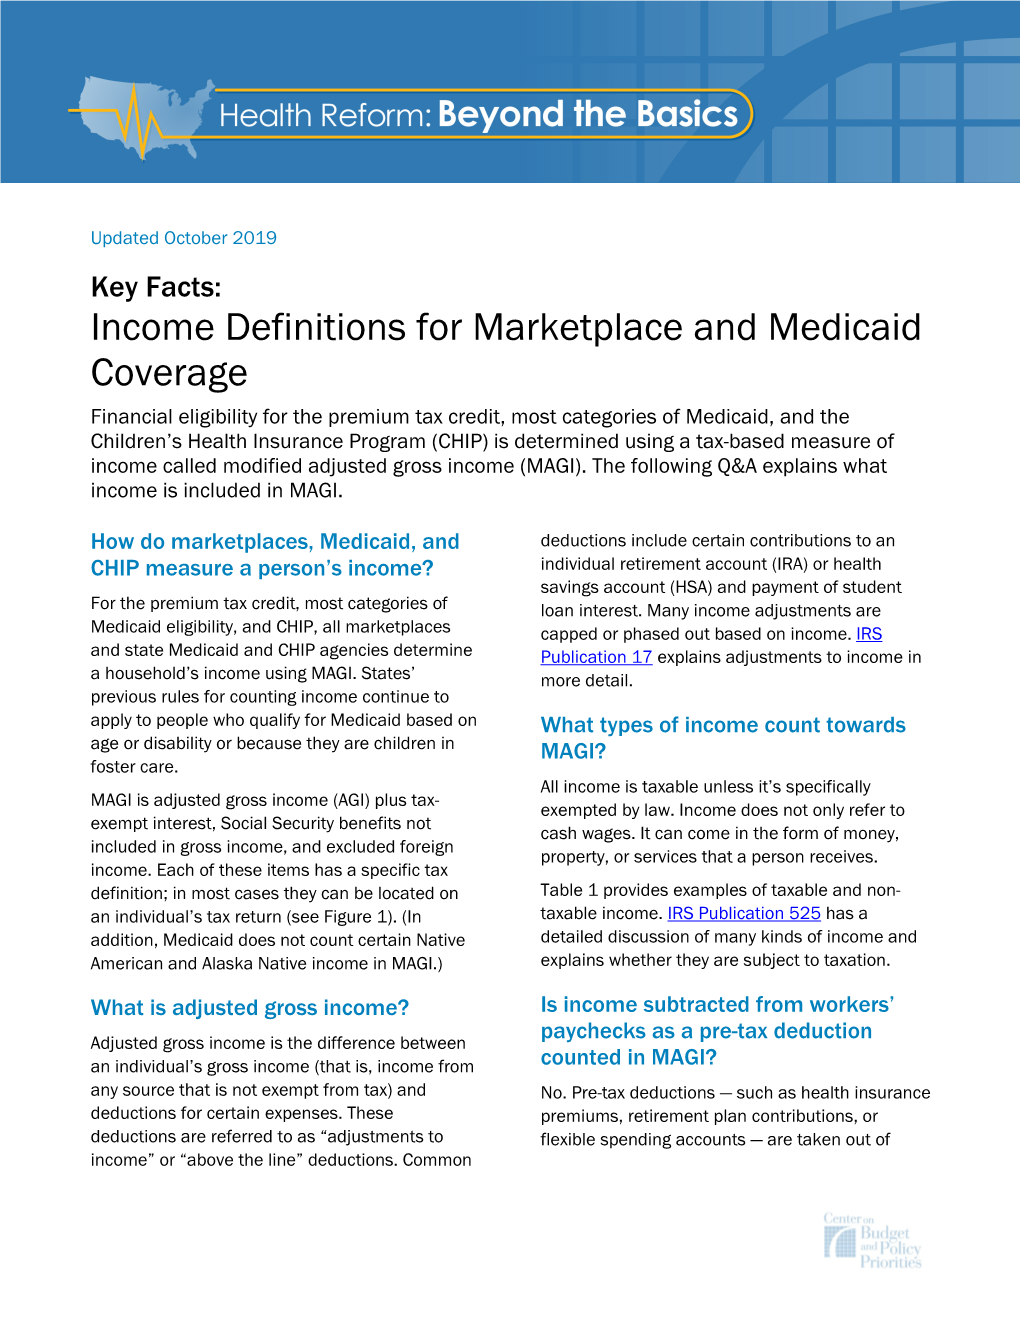 Income Definitions for Marketplace and Medicaid Coverage